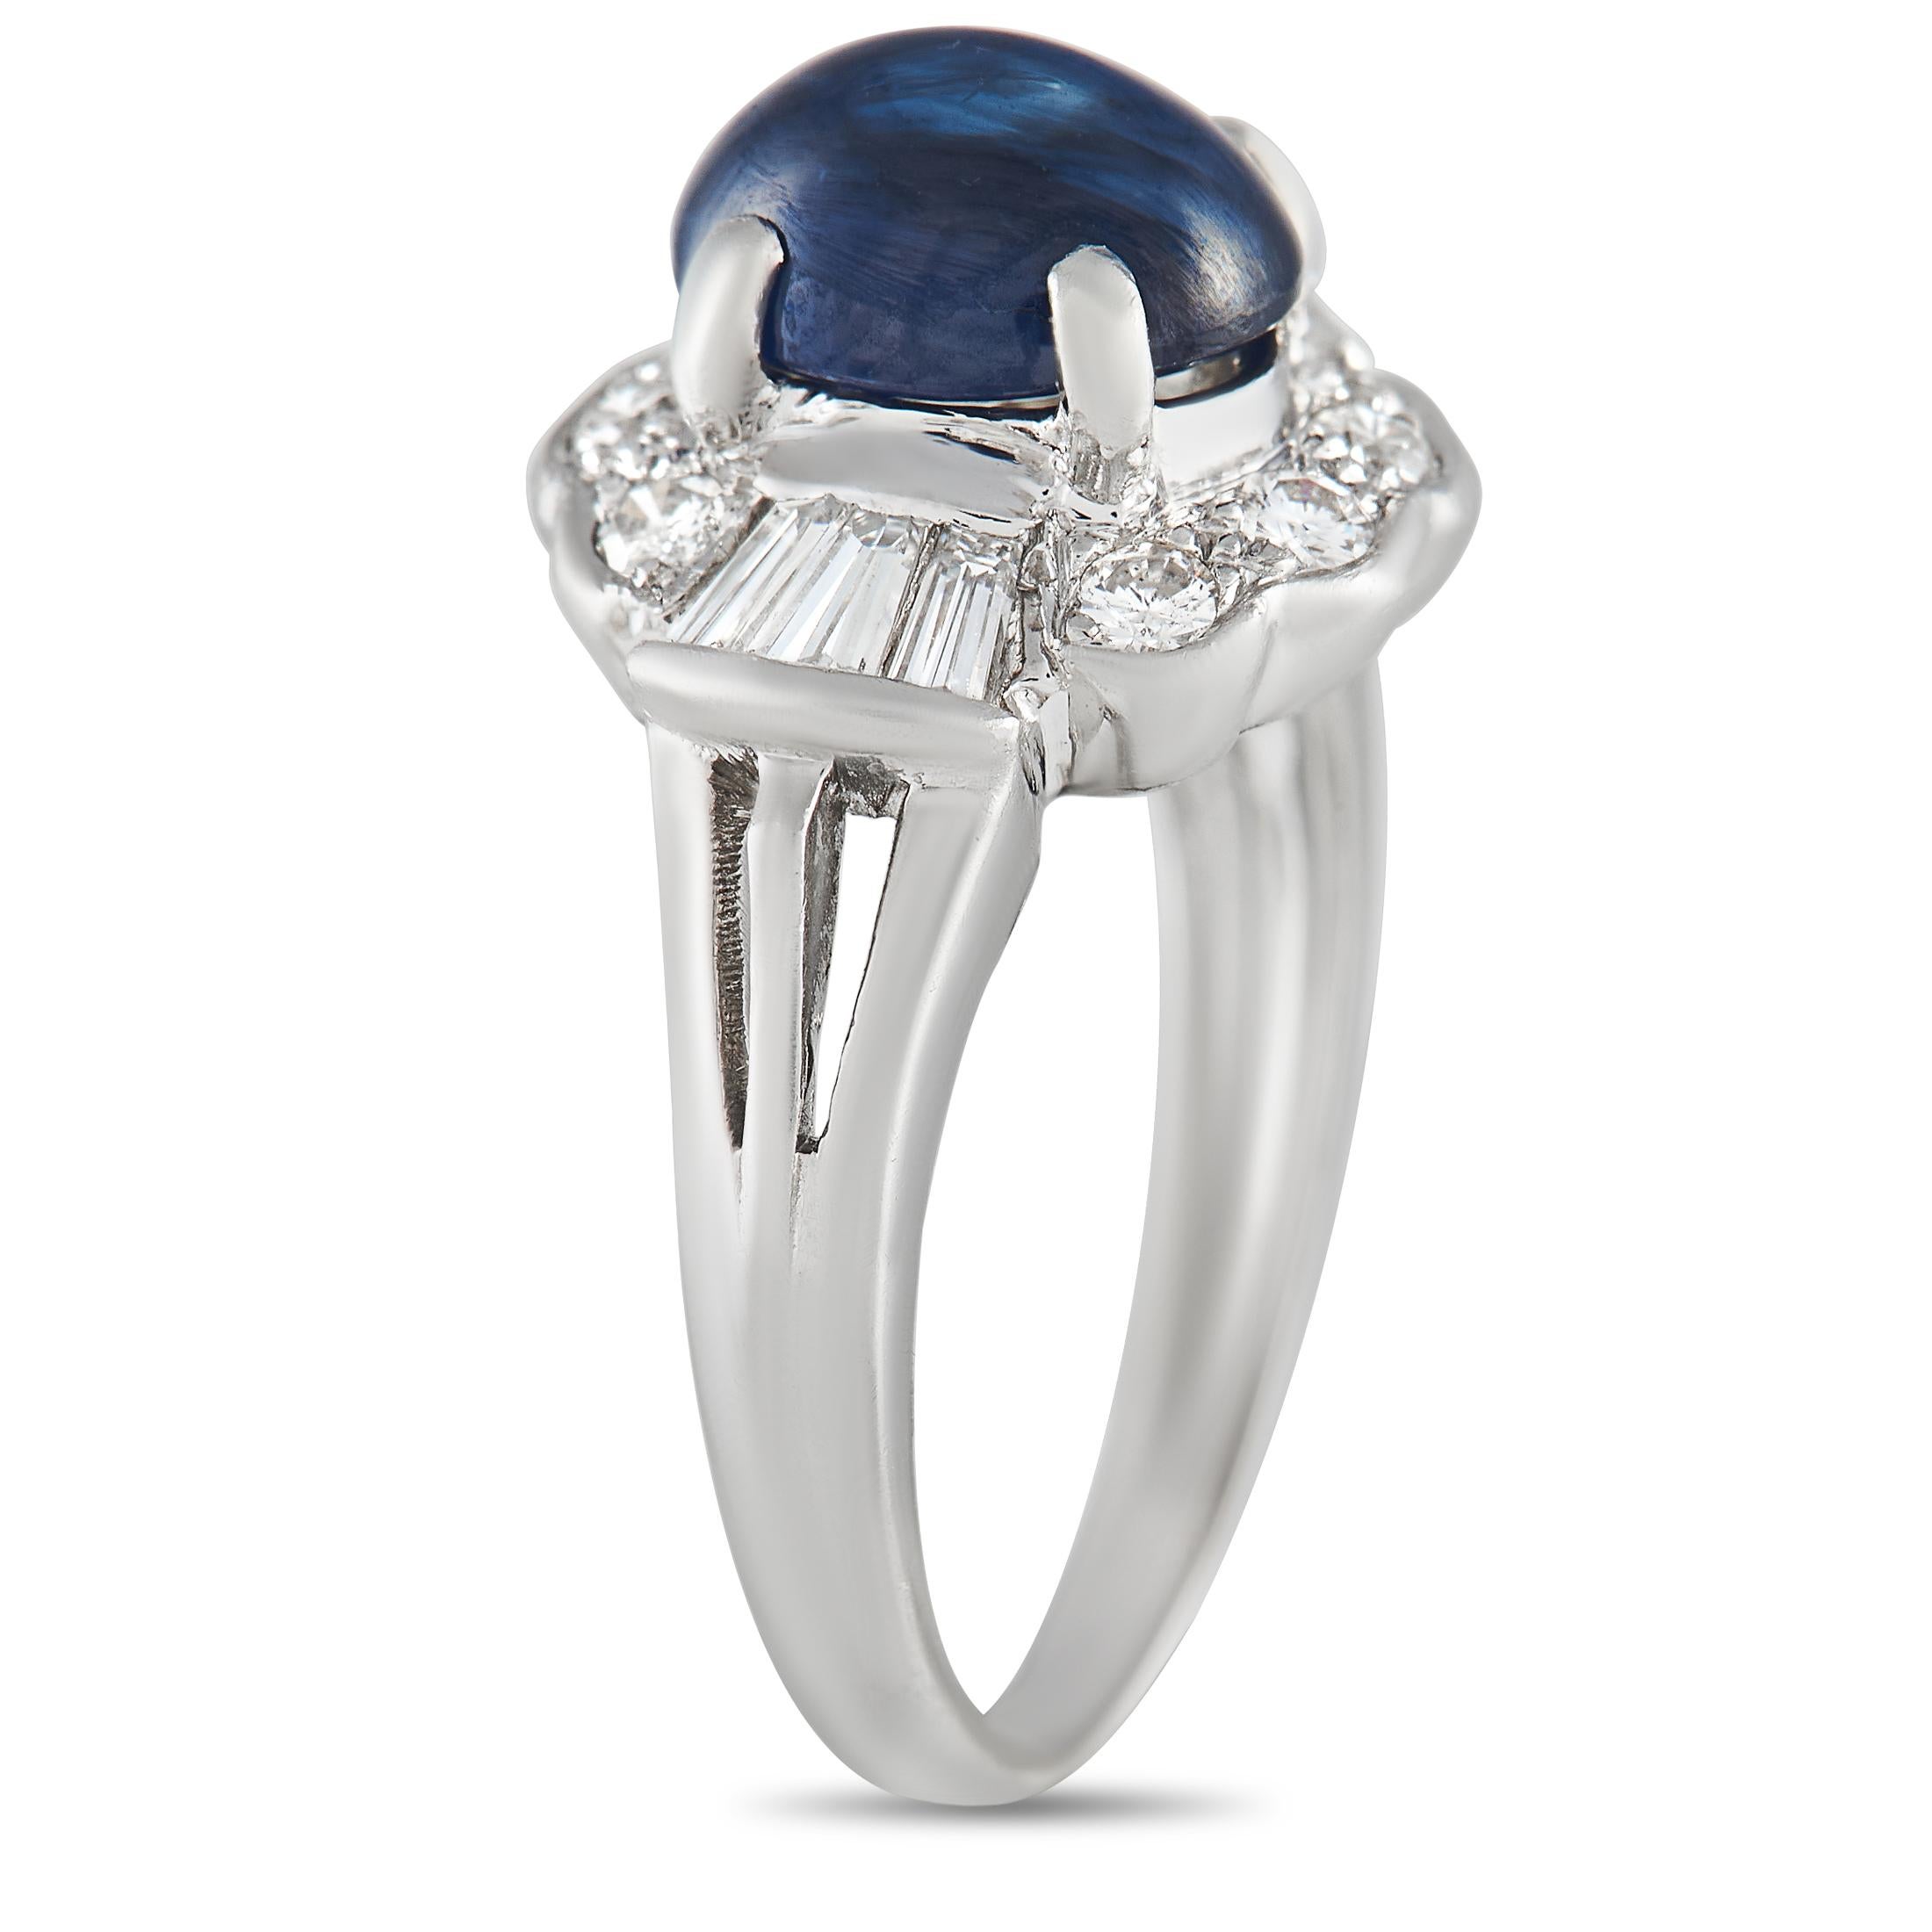 A diamond and sapphire ring to satisfy someone with a discerning taste. This platinum ring features a 2.51 ct sapphire cabochon sitting at the center of a stylized frame of diamonds. The blue gem features a domed profile complemented by the